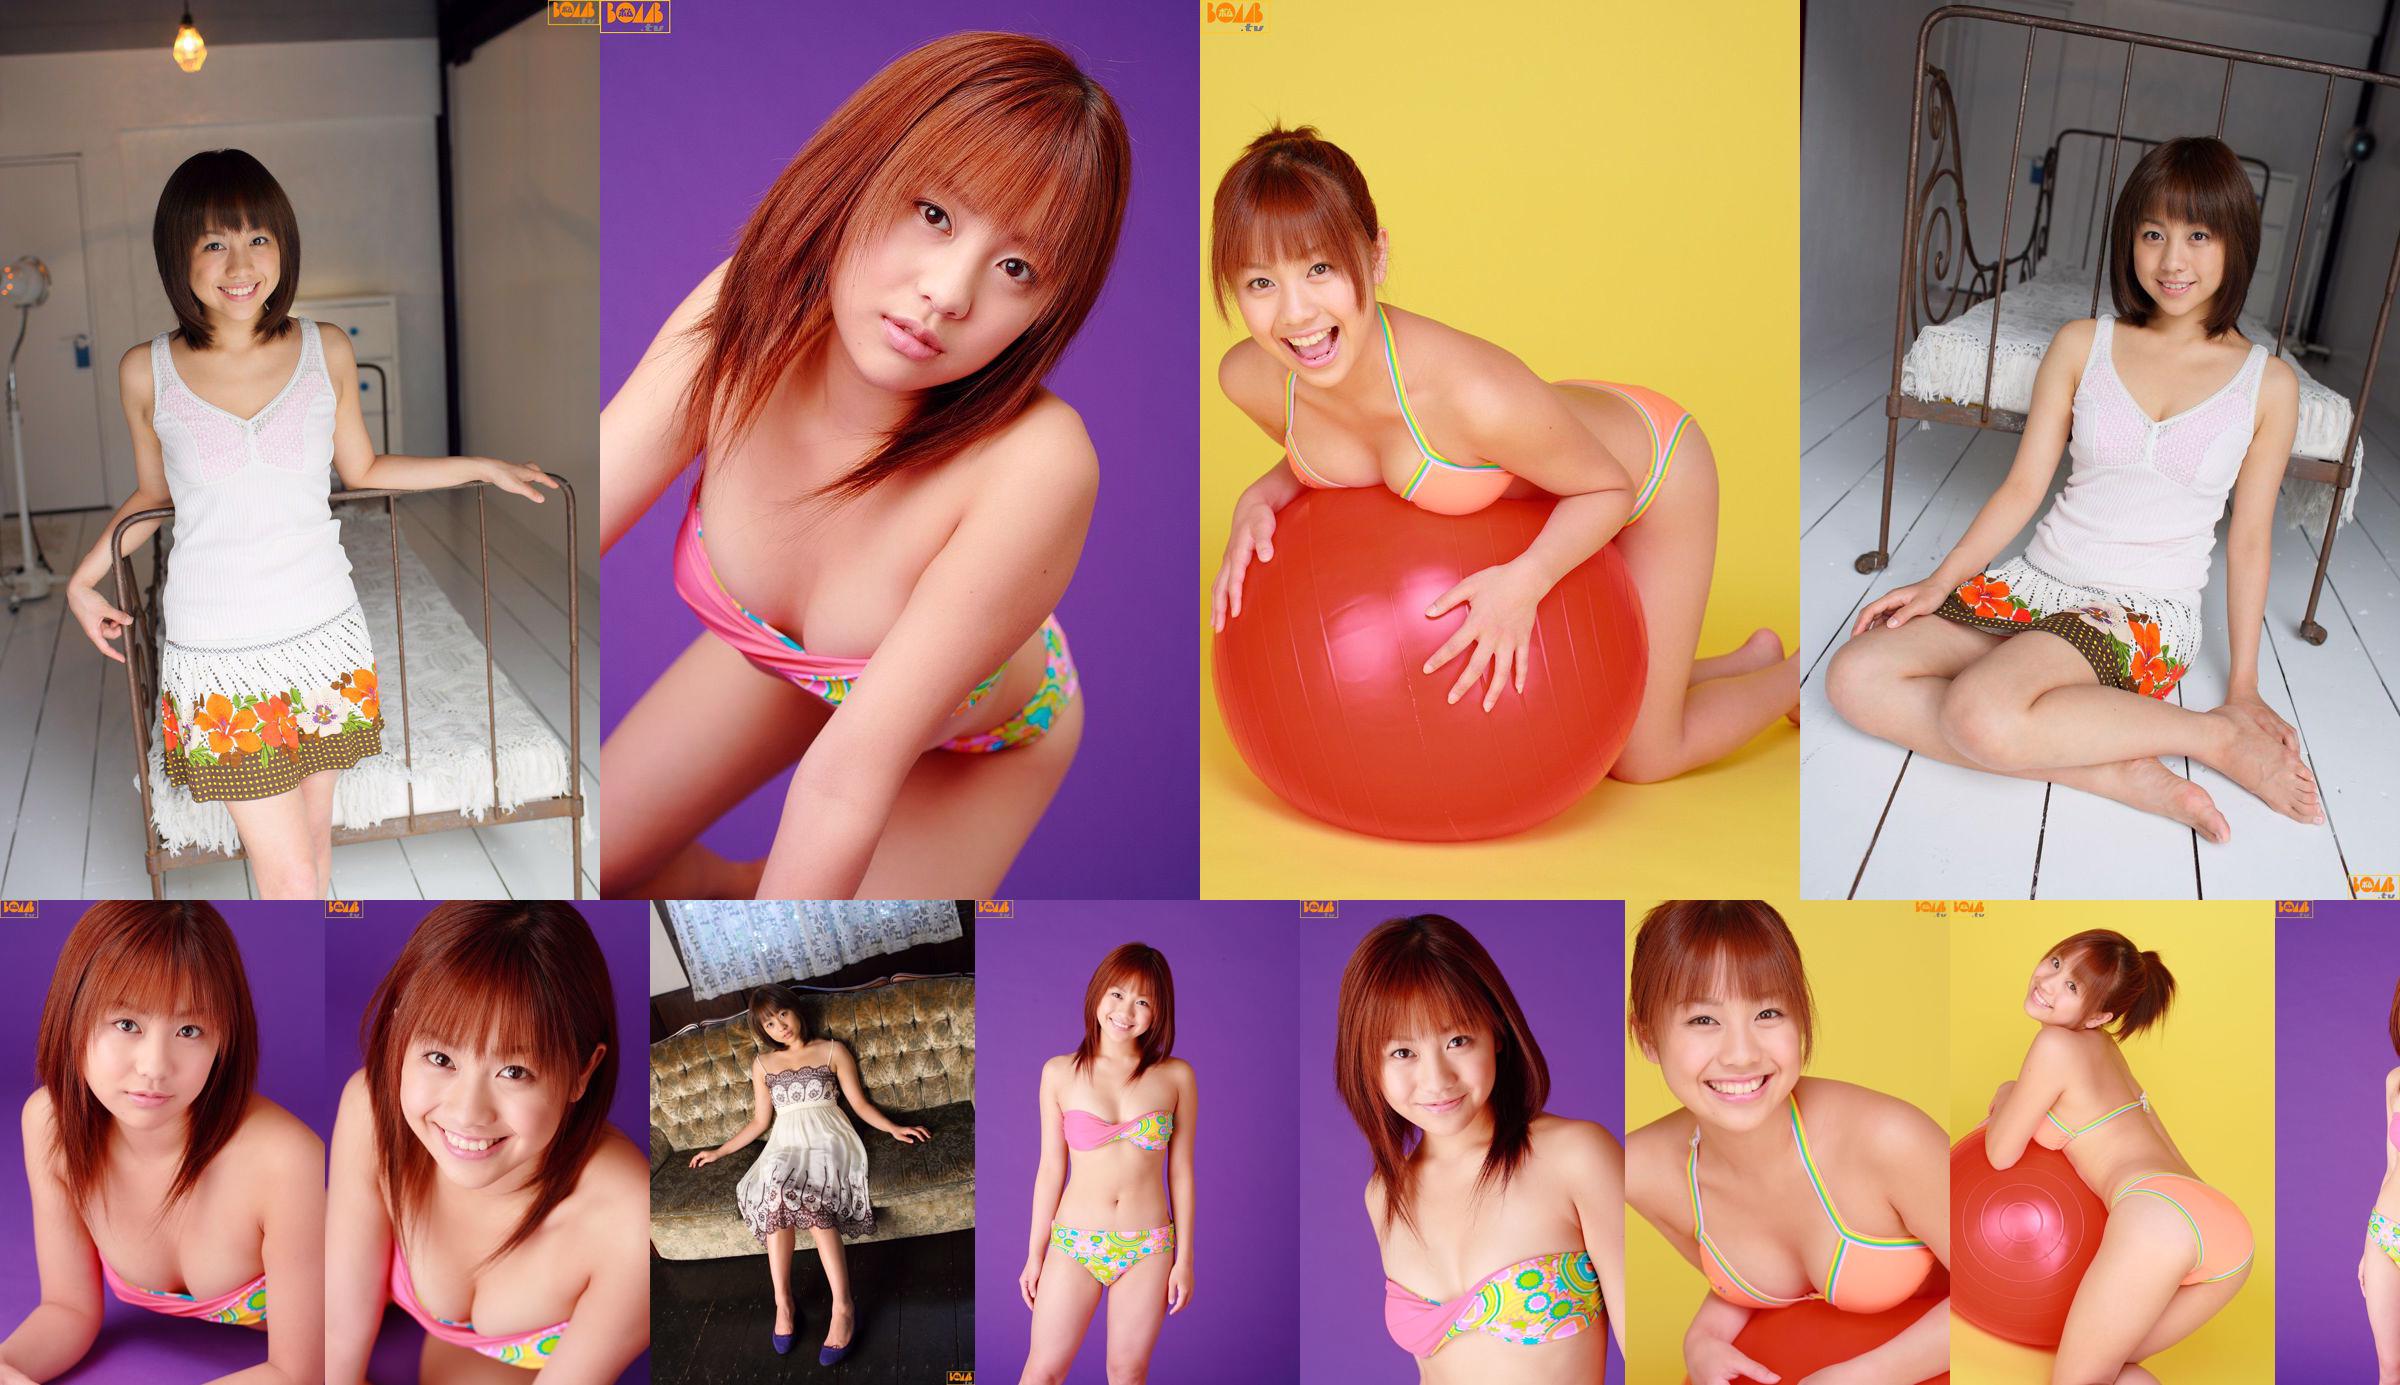 [Bomb.TV] February 2006 issue of Akie Suzuki 鈴木あきえ-Channel B No.116385 Page 1